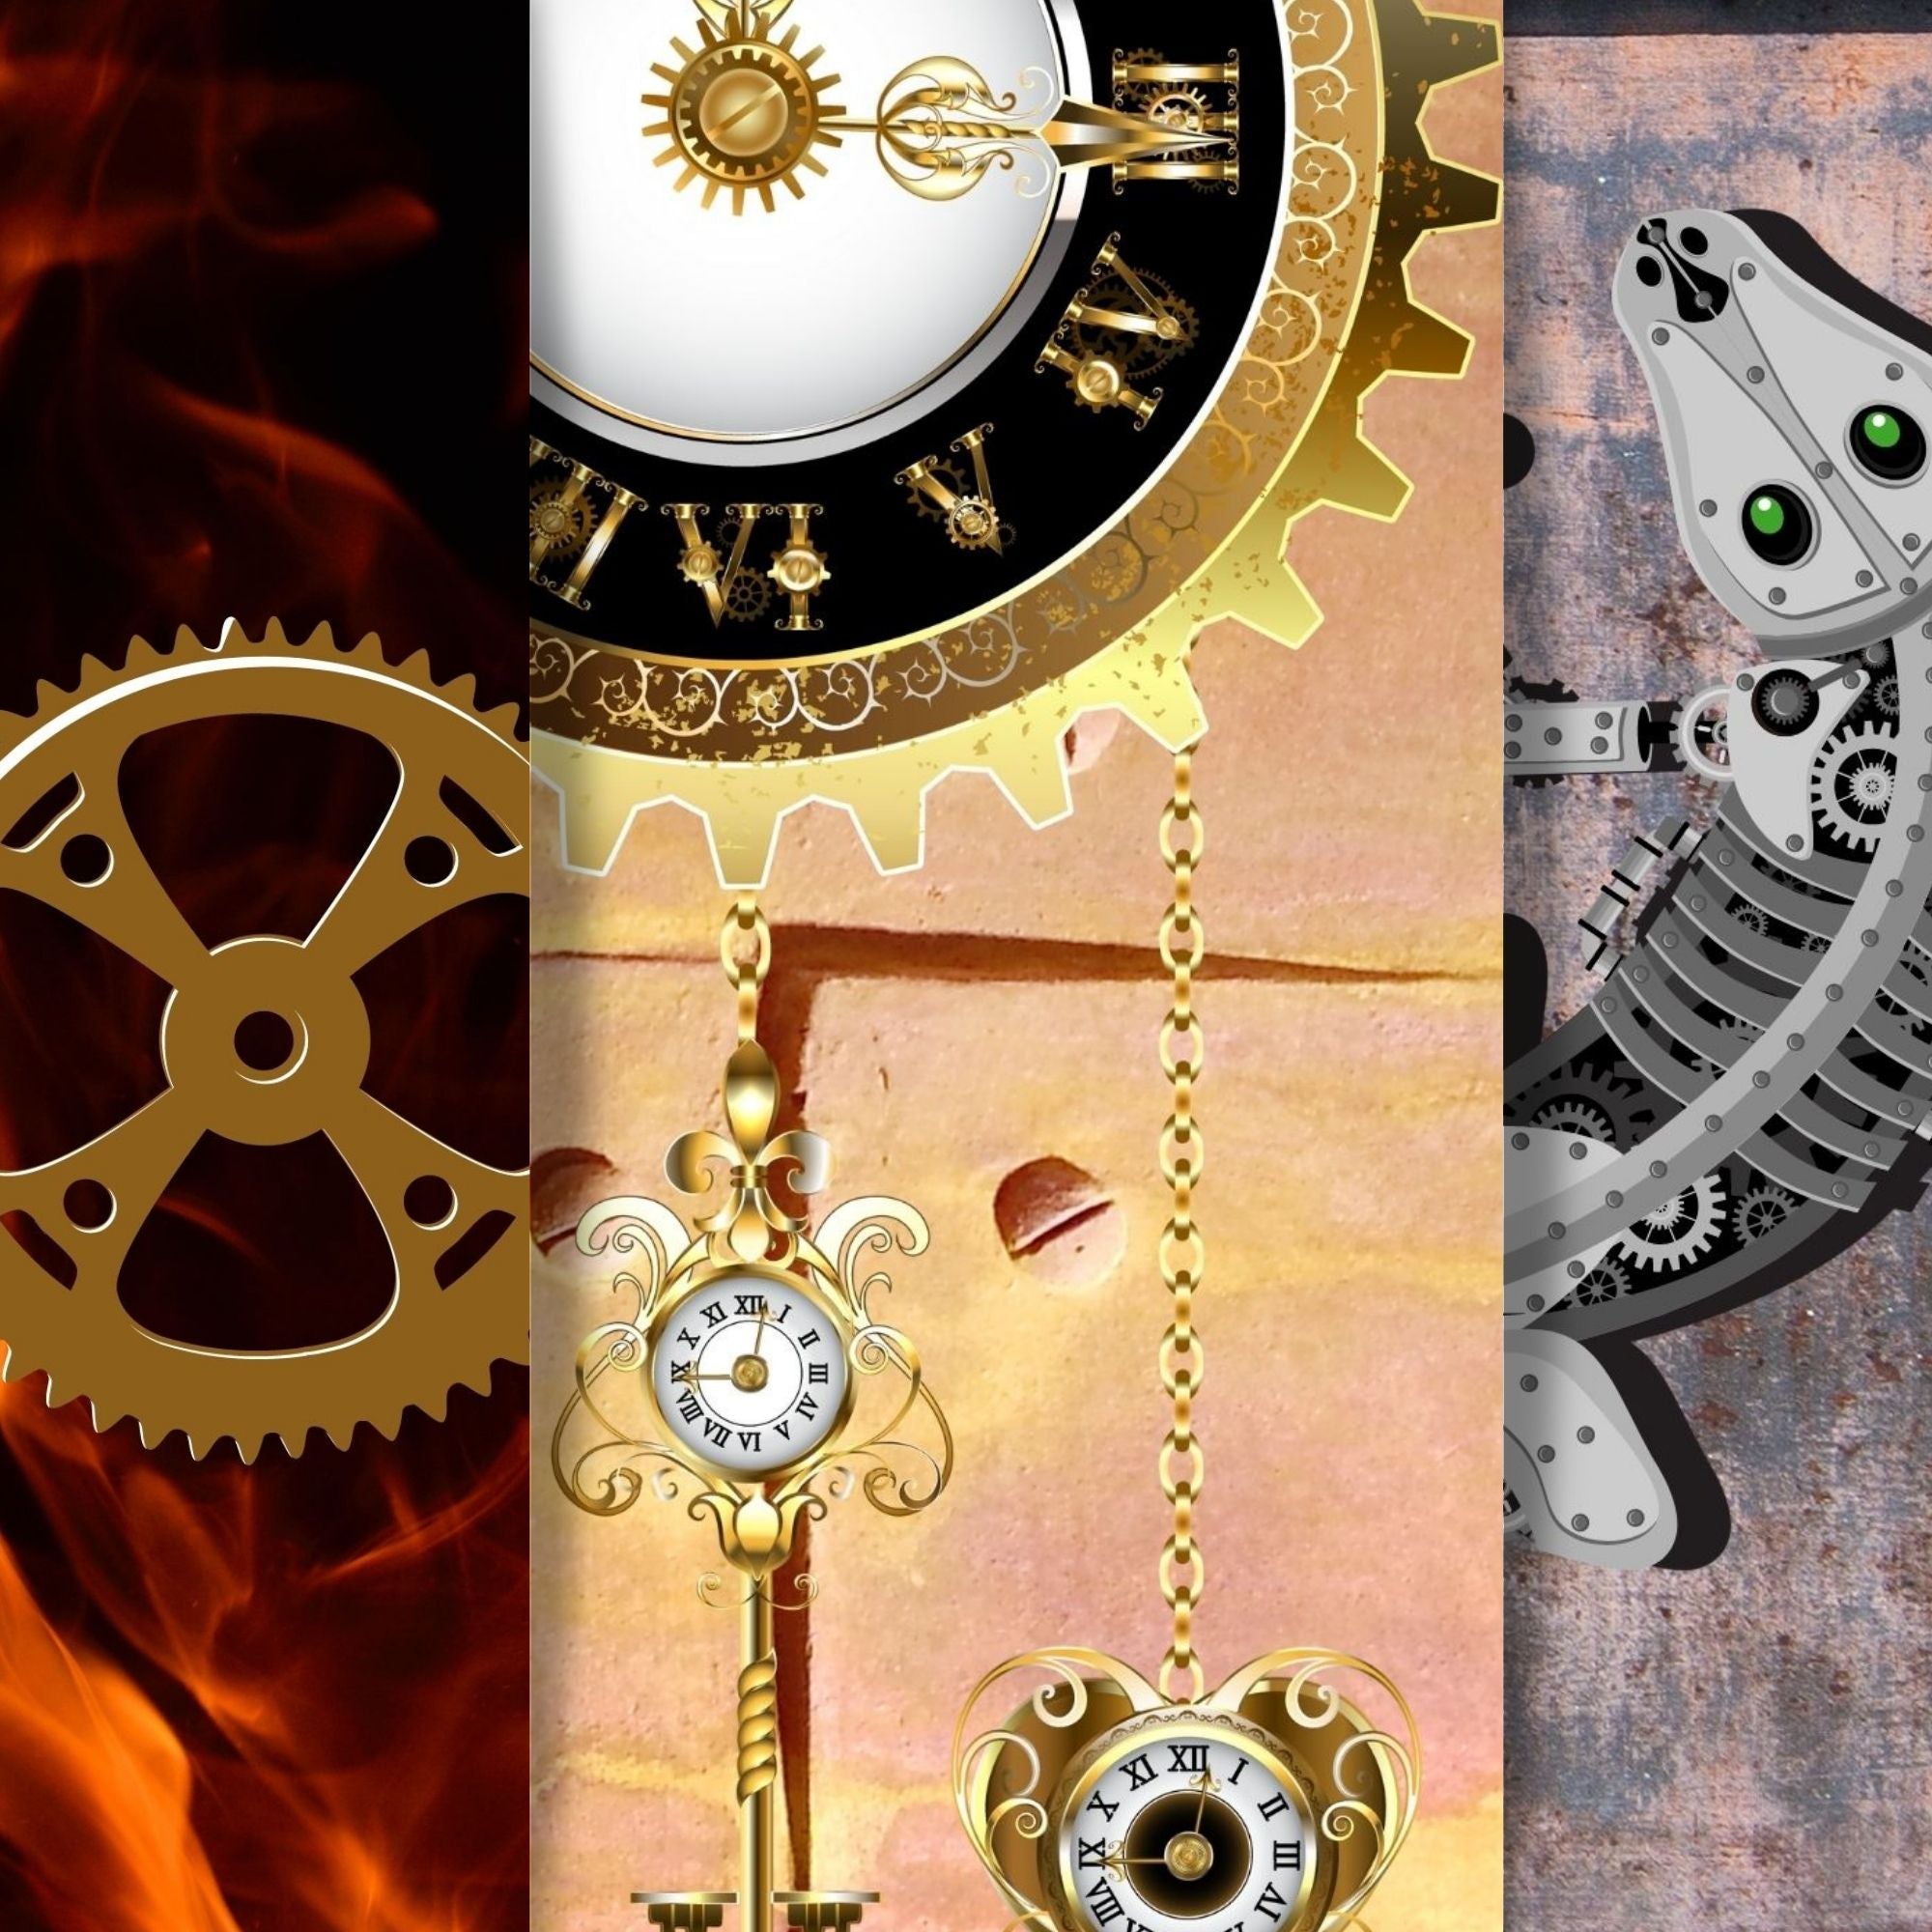 Scrapbookers, this is what you've been looking for! This steampunk themed bundle has 30 unique images that can be printed or used as digital backgrounds.